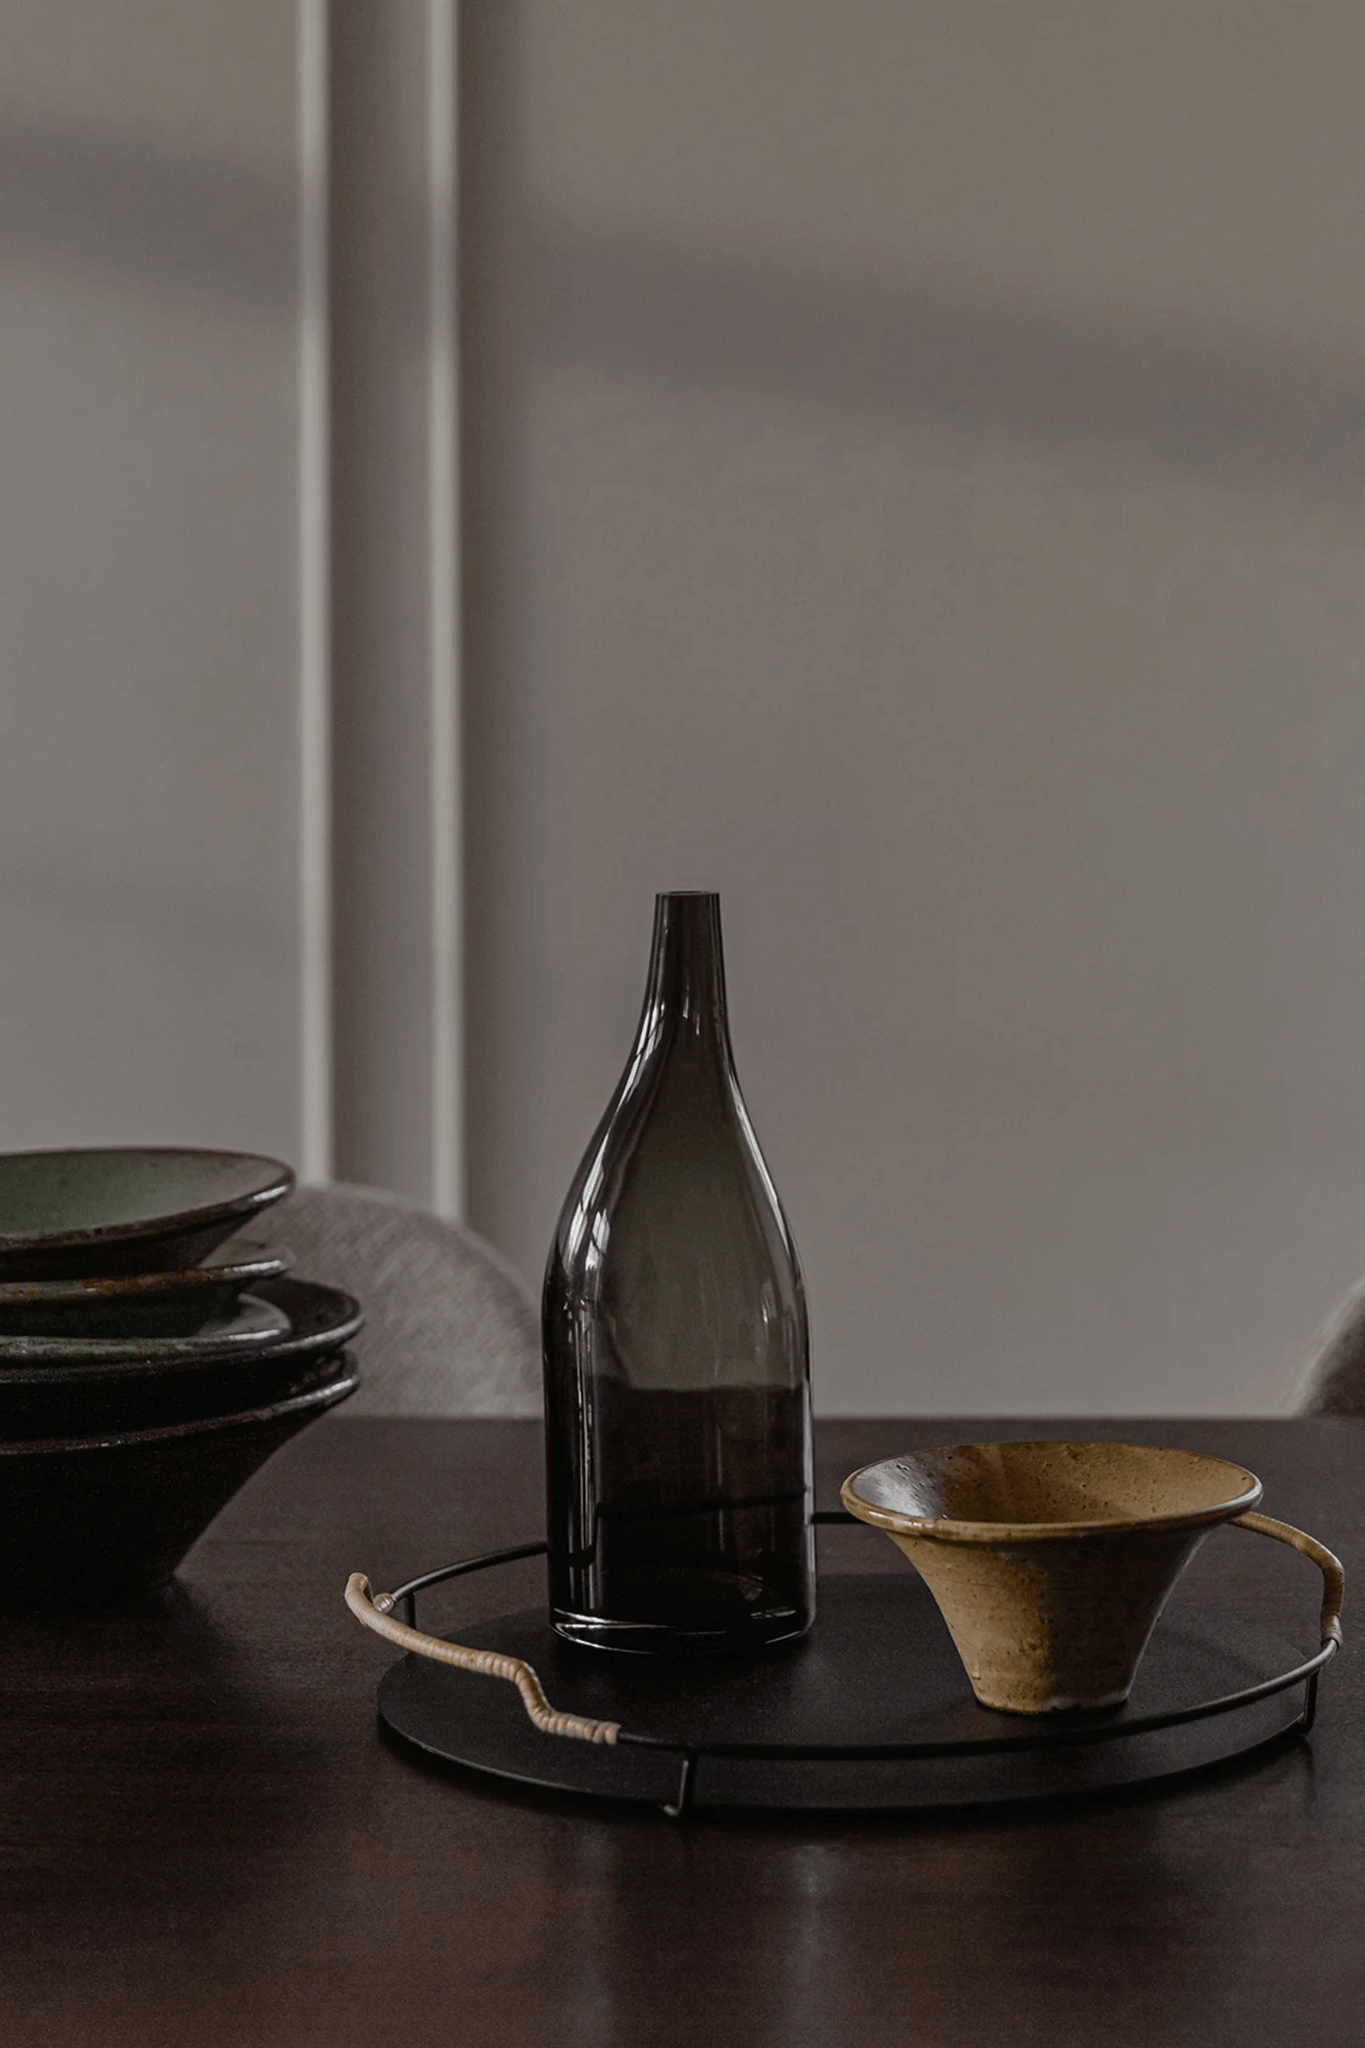 Black Balcony Serving Tray by Menu, shown on table with bottle and vessel